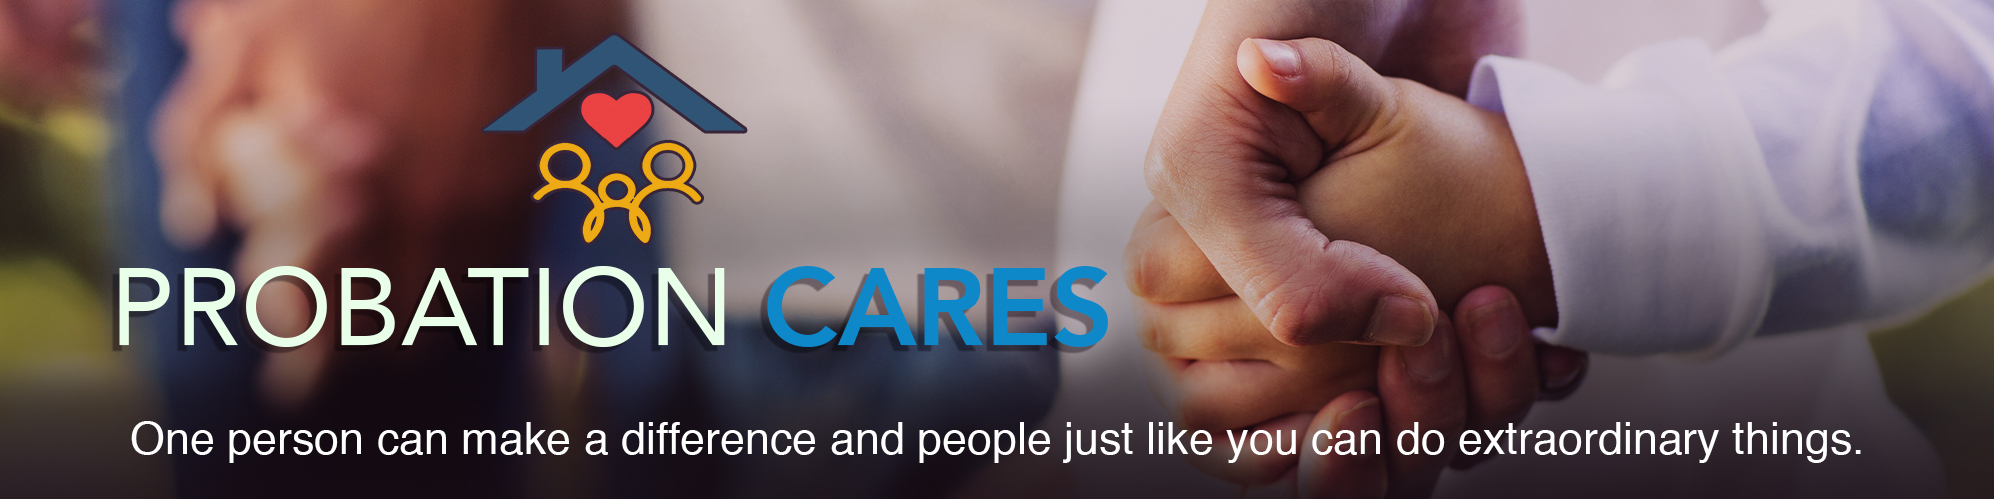 Probation Cares - One person can make a difference and people just like you can do extraordinary things.